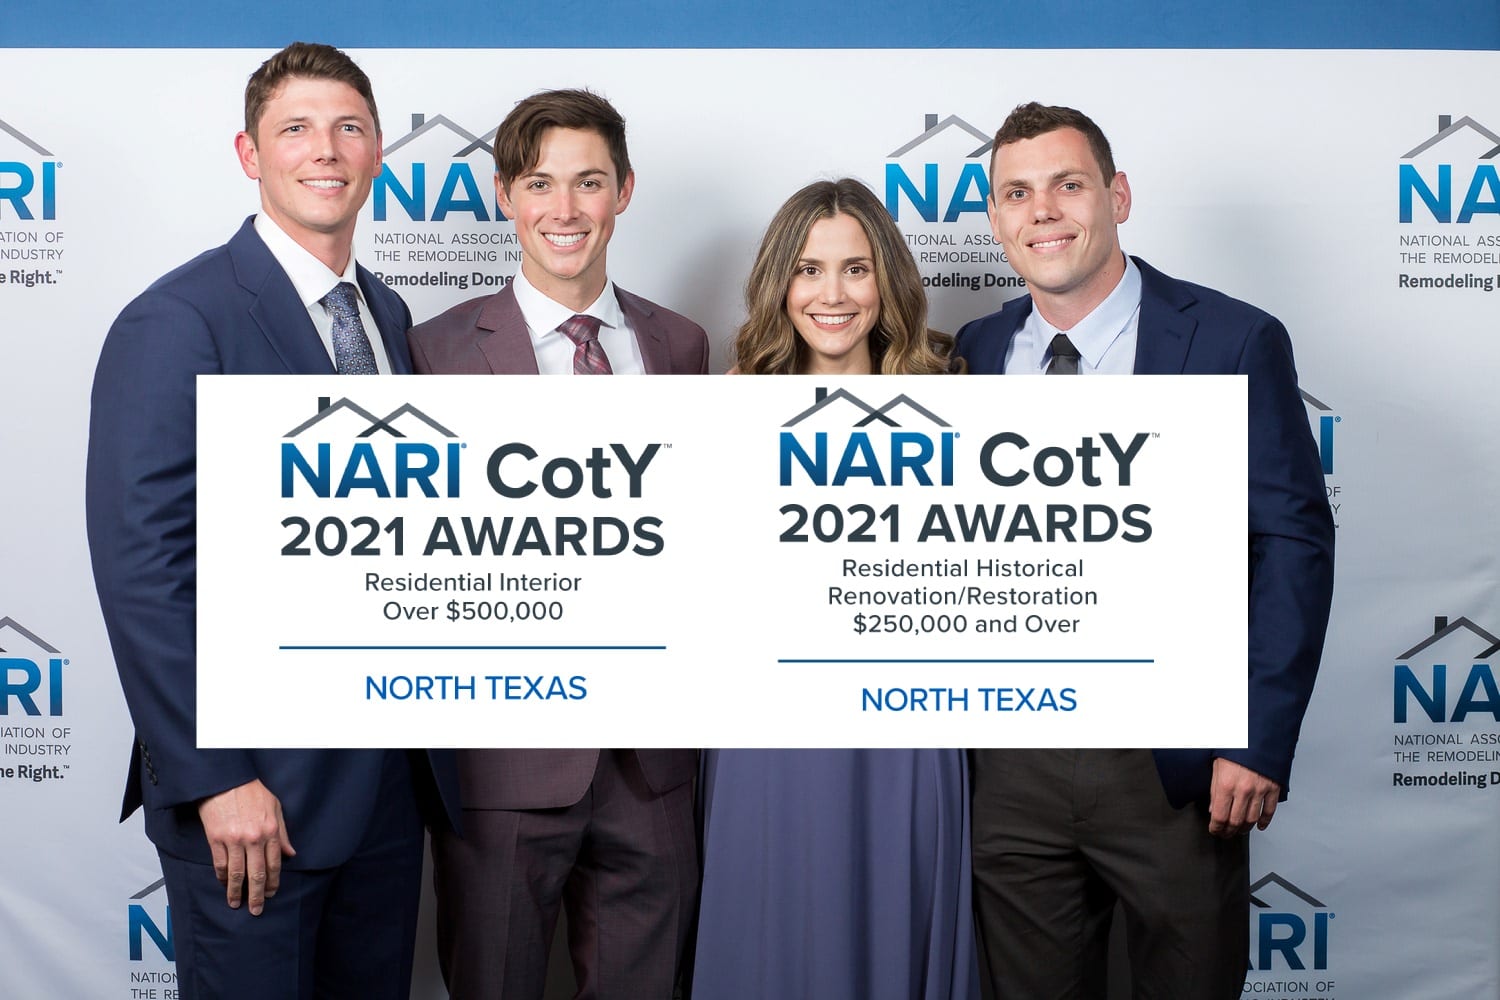 Renowned Renovation Wins Dallas NARI Contractor of the Year Awards